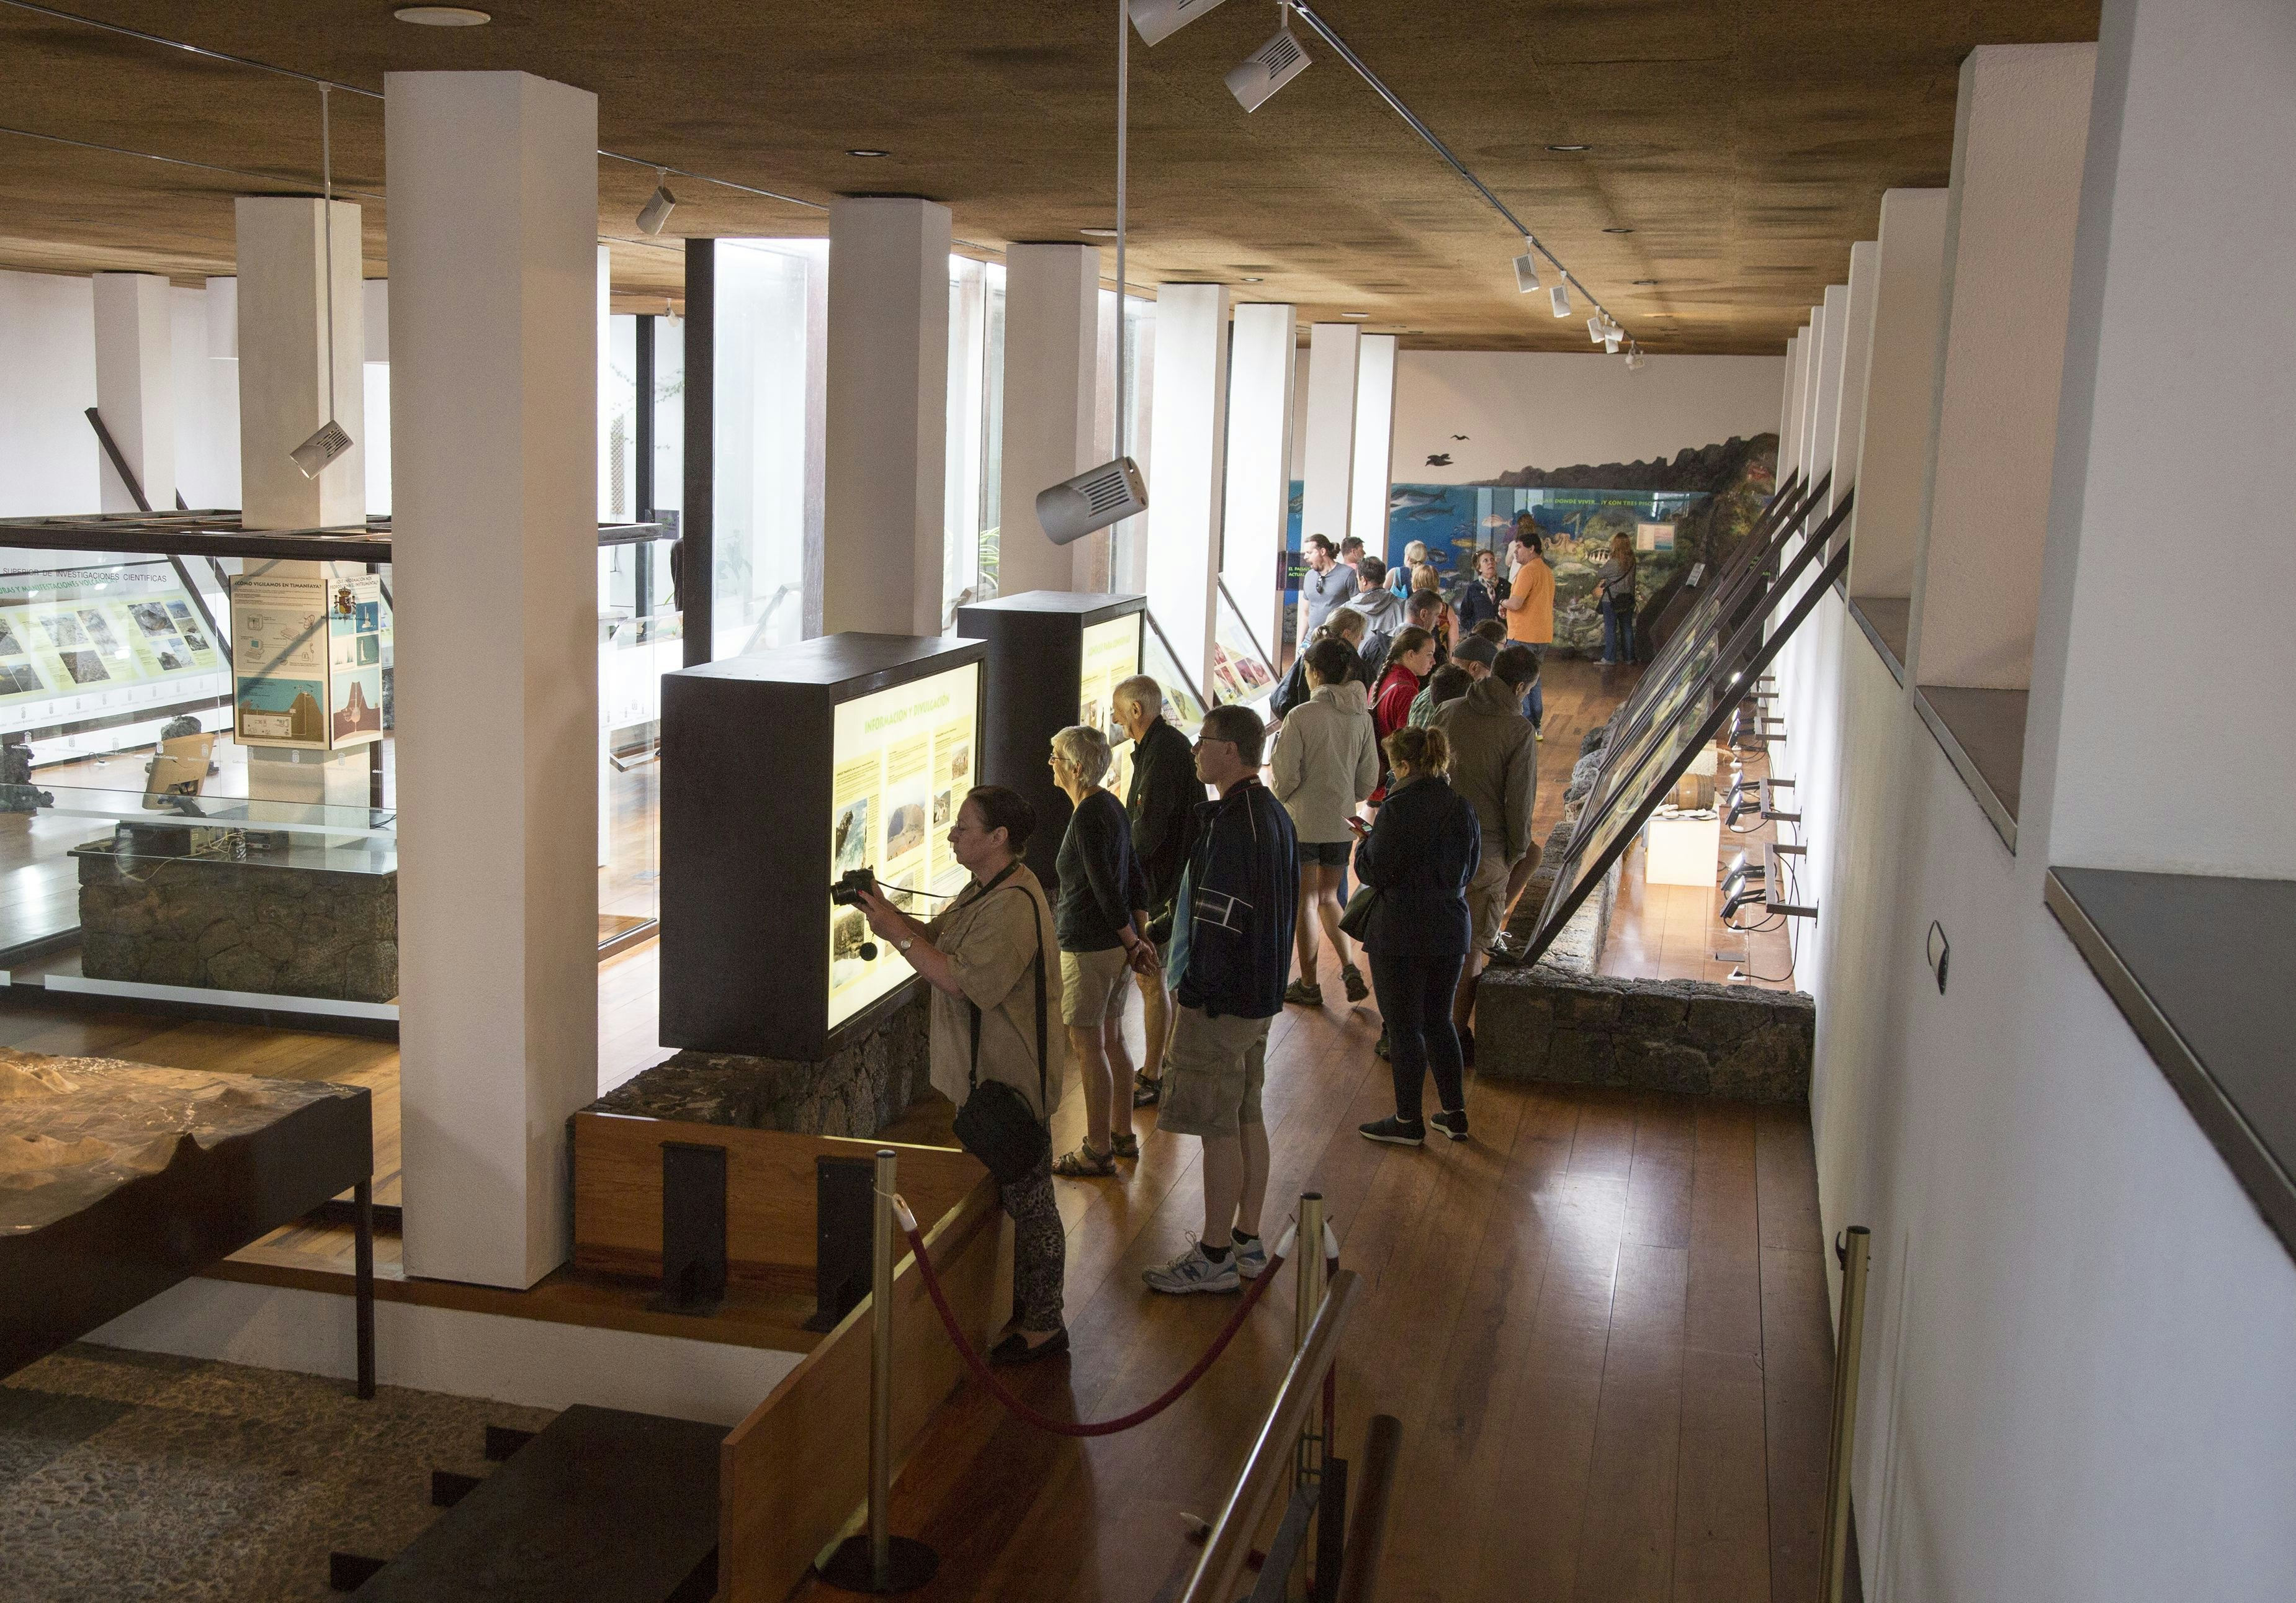 A group of tourists read visual displays and even photograph signage at Timanfaya Volcano Interpretation and Visitors Centre at the Canary Islands in Spain. The room in which the tourists stand is made up of white rectangular columns and smooth white plaster walls with a warm-toned brown ceiling and wooden floor with wide planks. The columns divide the room into two sections full of different exhibits and back-lit informational stations.